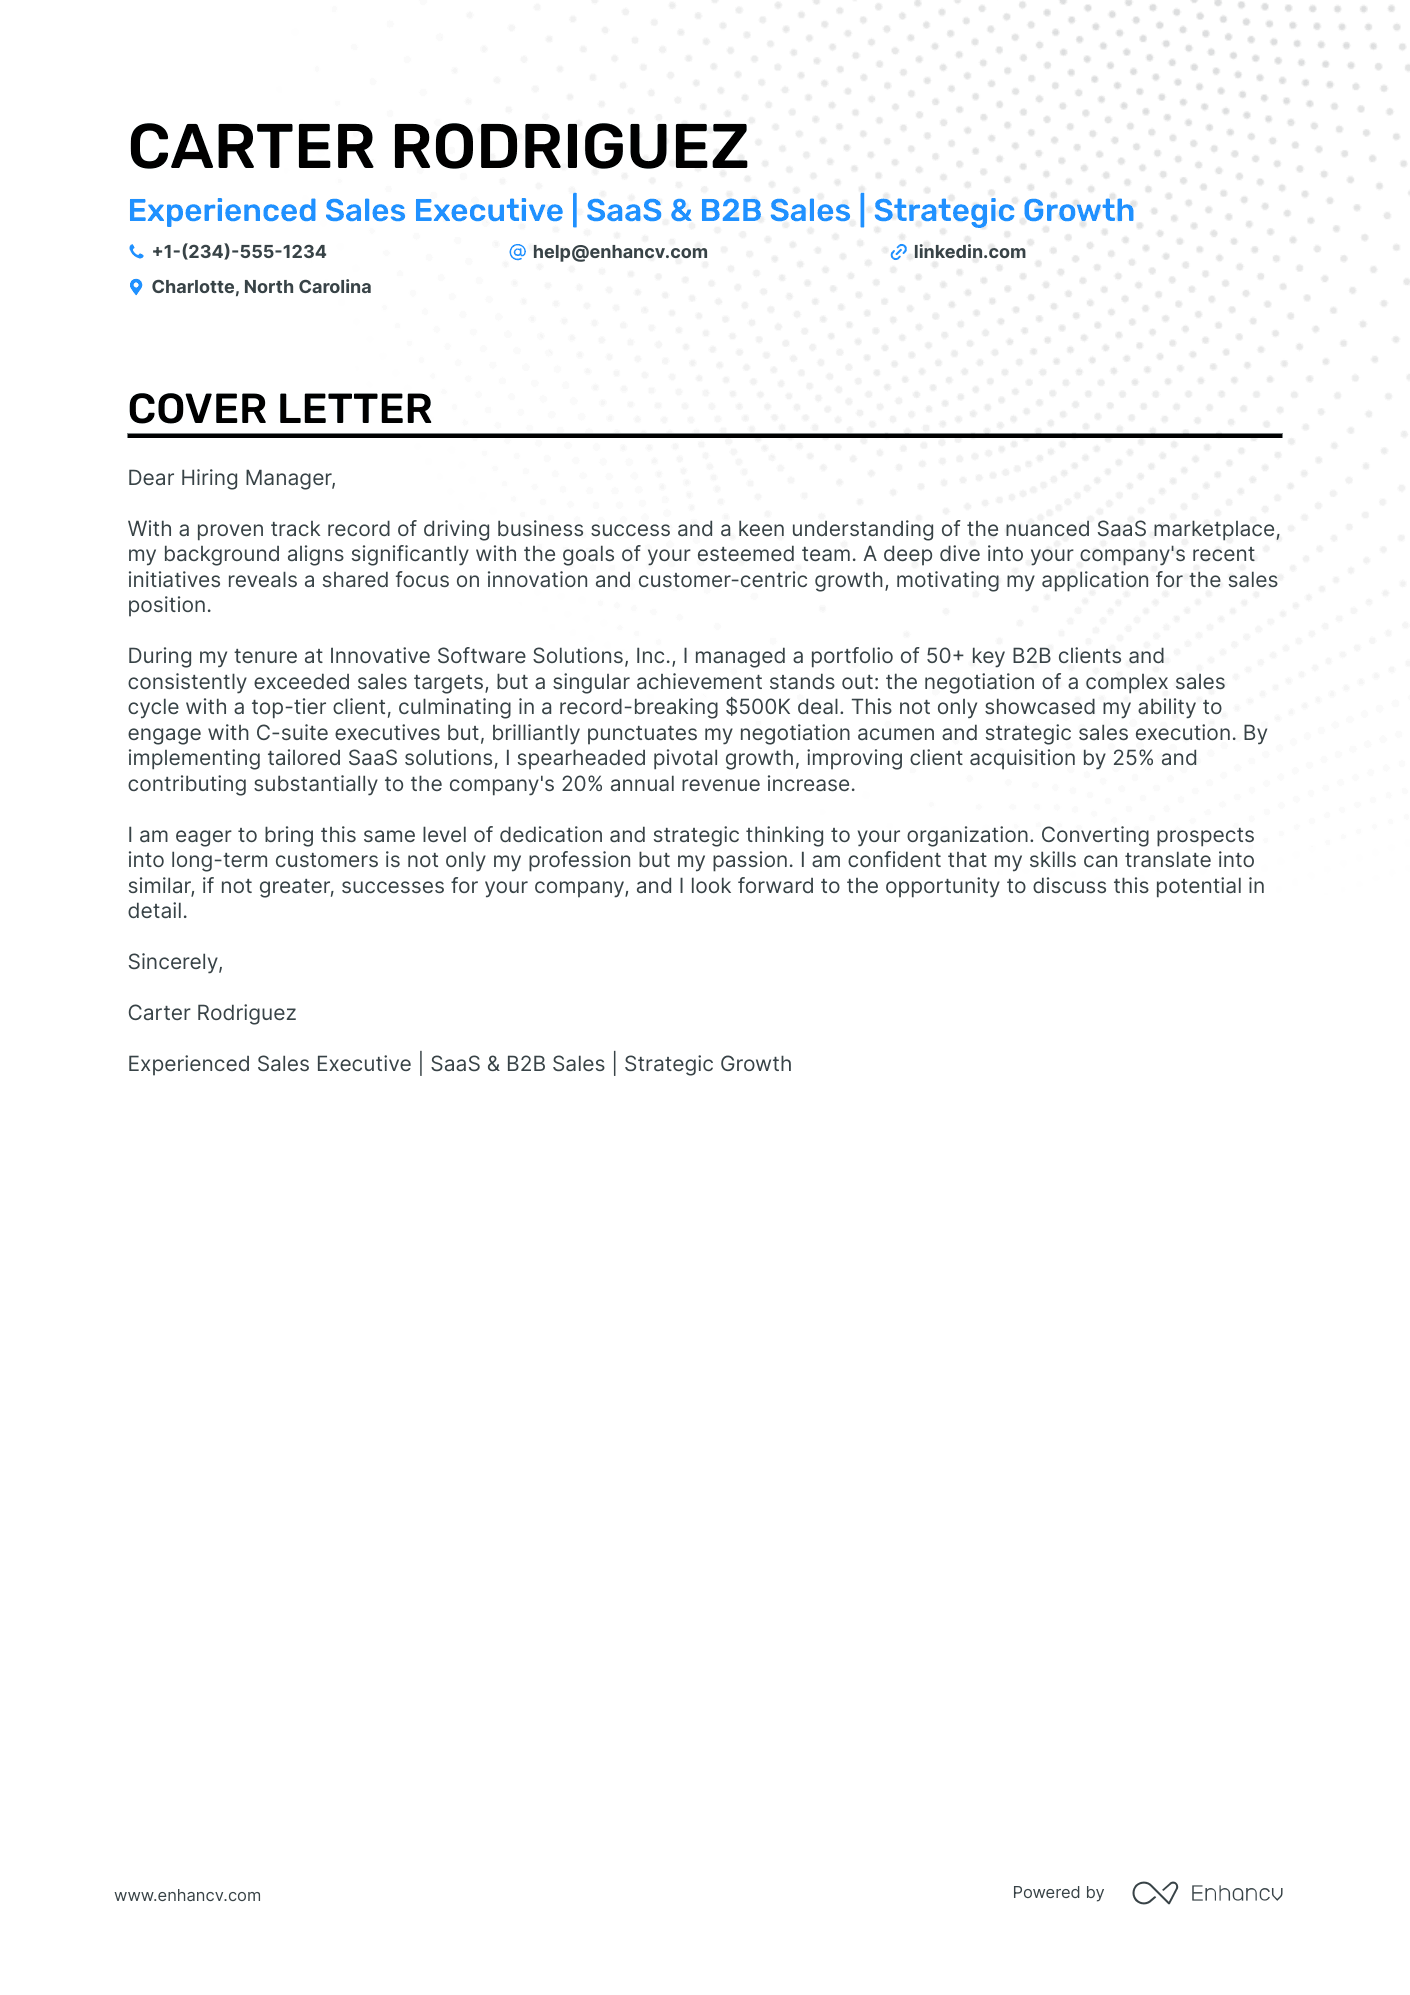 Phone Sales cover letter